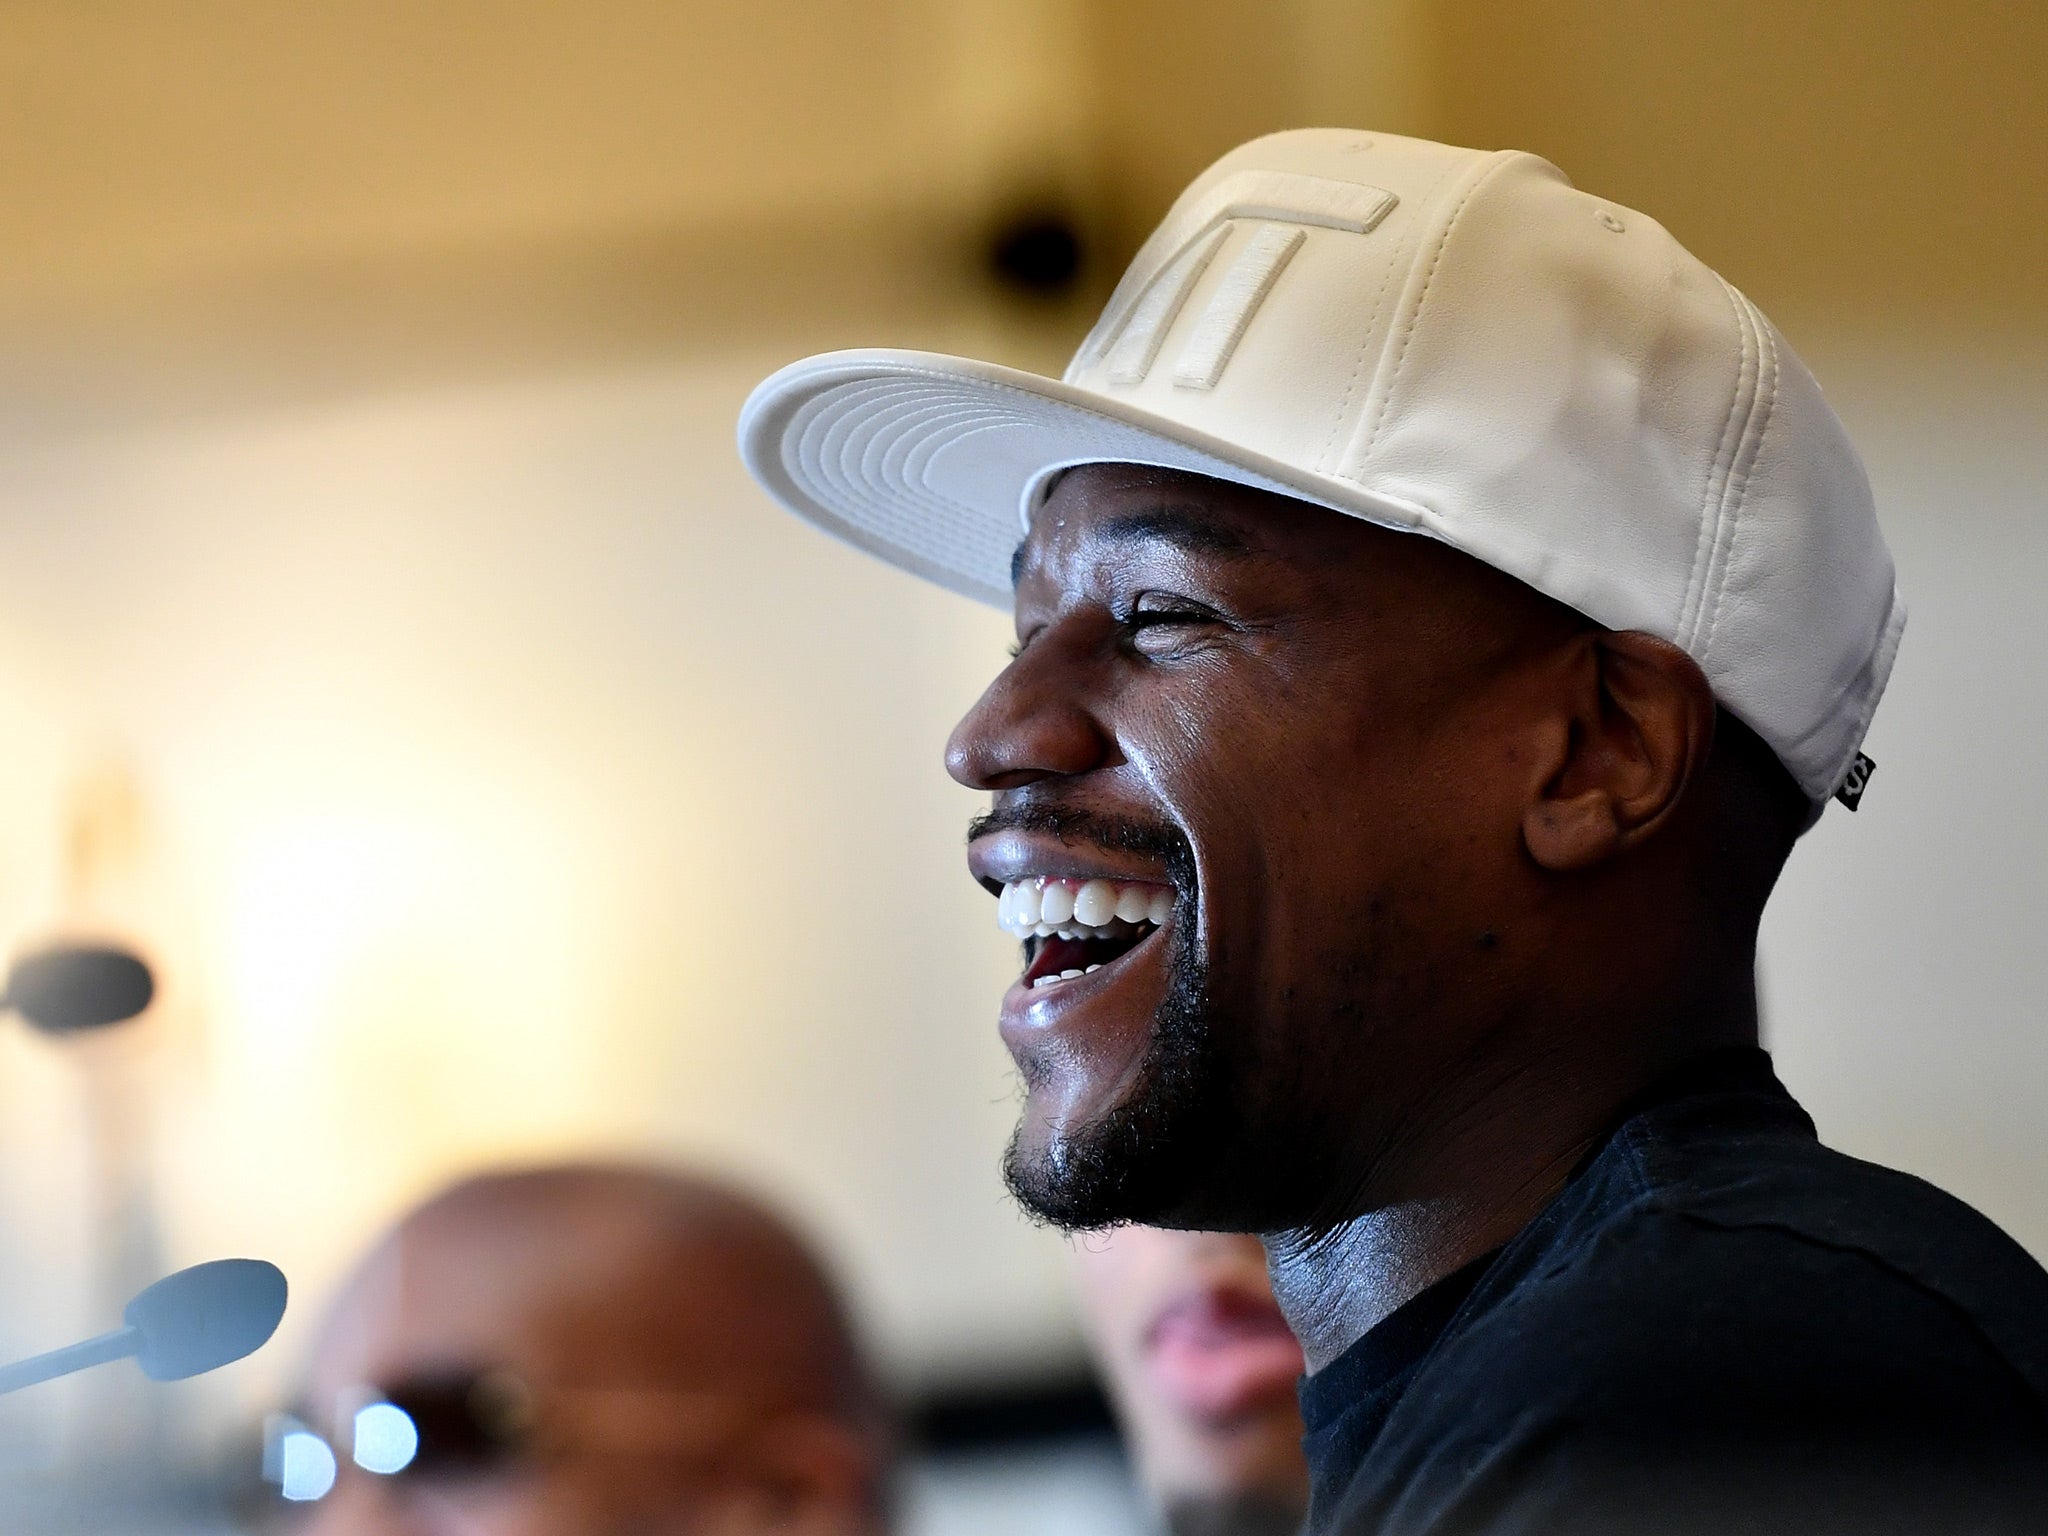 Floyd Mayweather would not comment on Conor McGregor's claims that their fight was edging closer